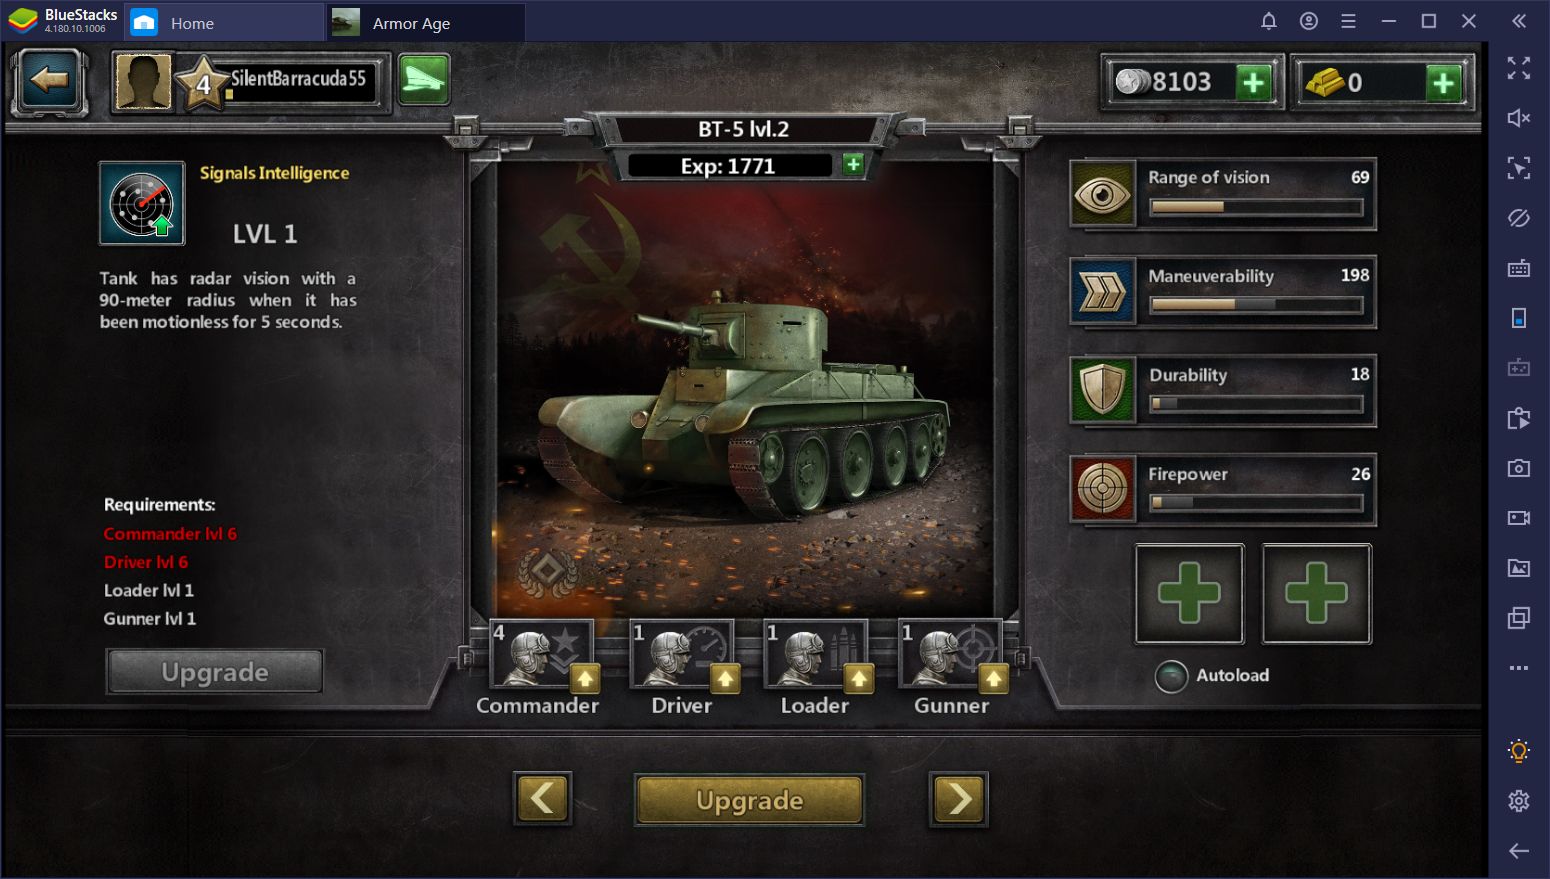 Beginner’s Guide for Armor Age: Tank Wars on PC